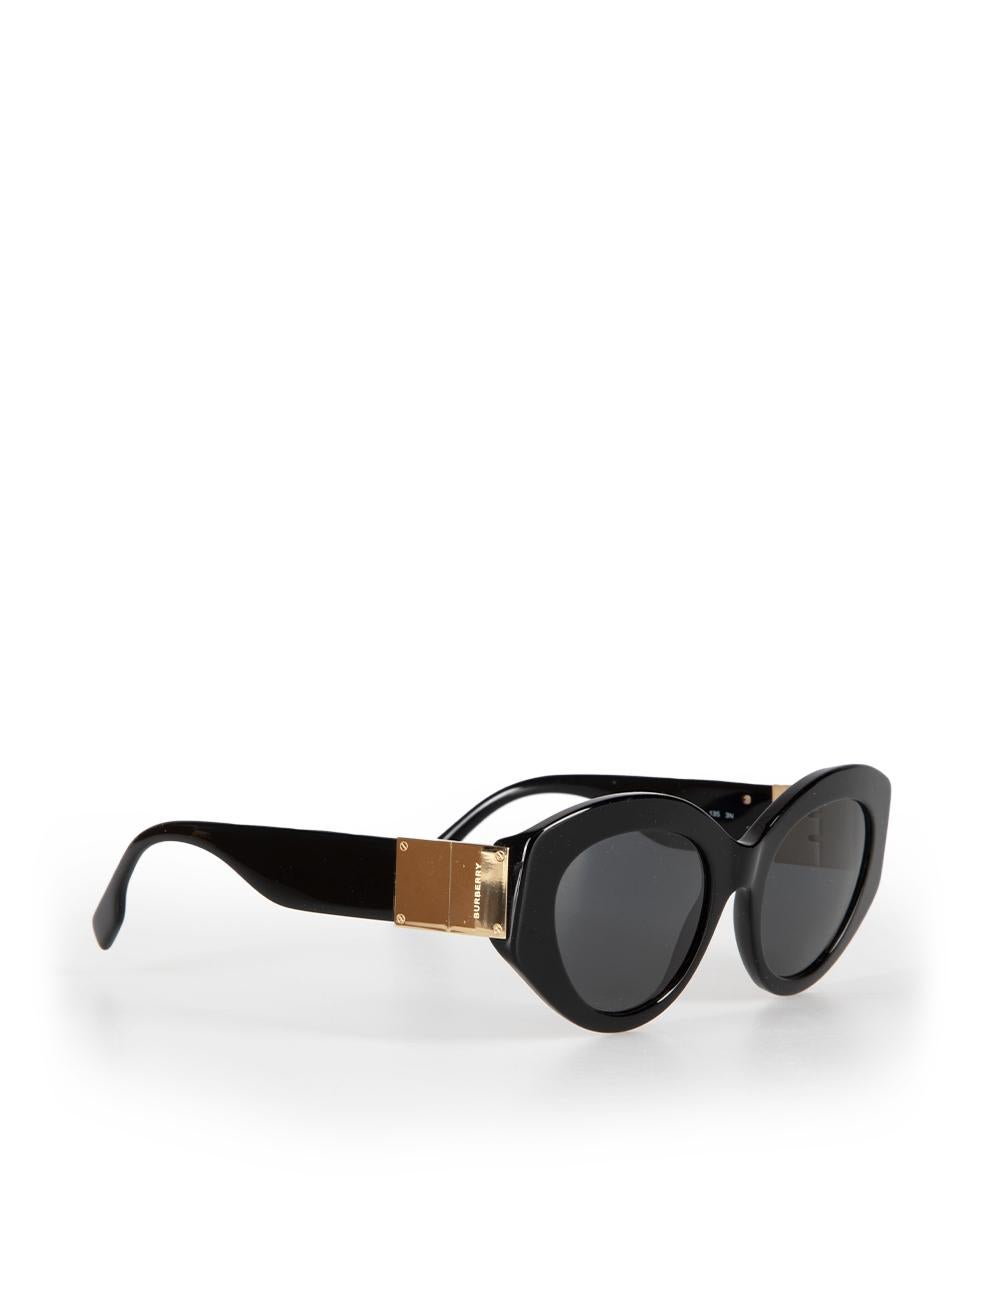 Burberry Black Cat Eye Sophia Sunglasses In New Condition For Sale In London, GB